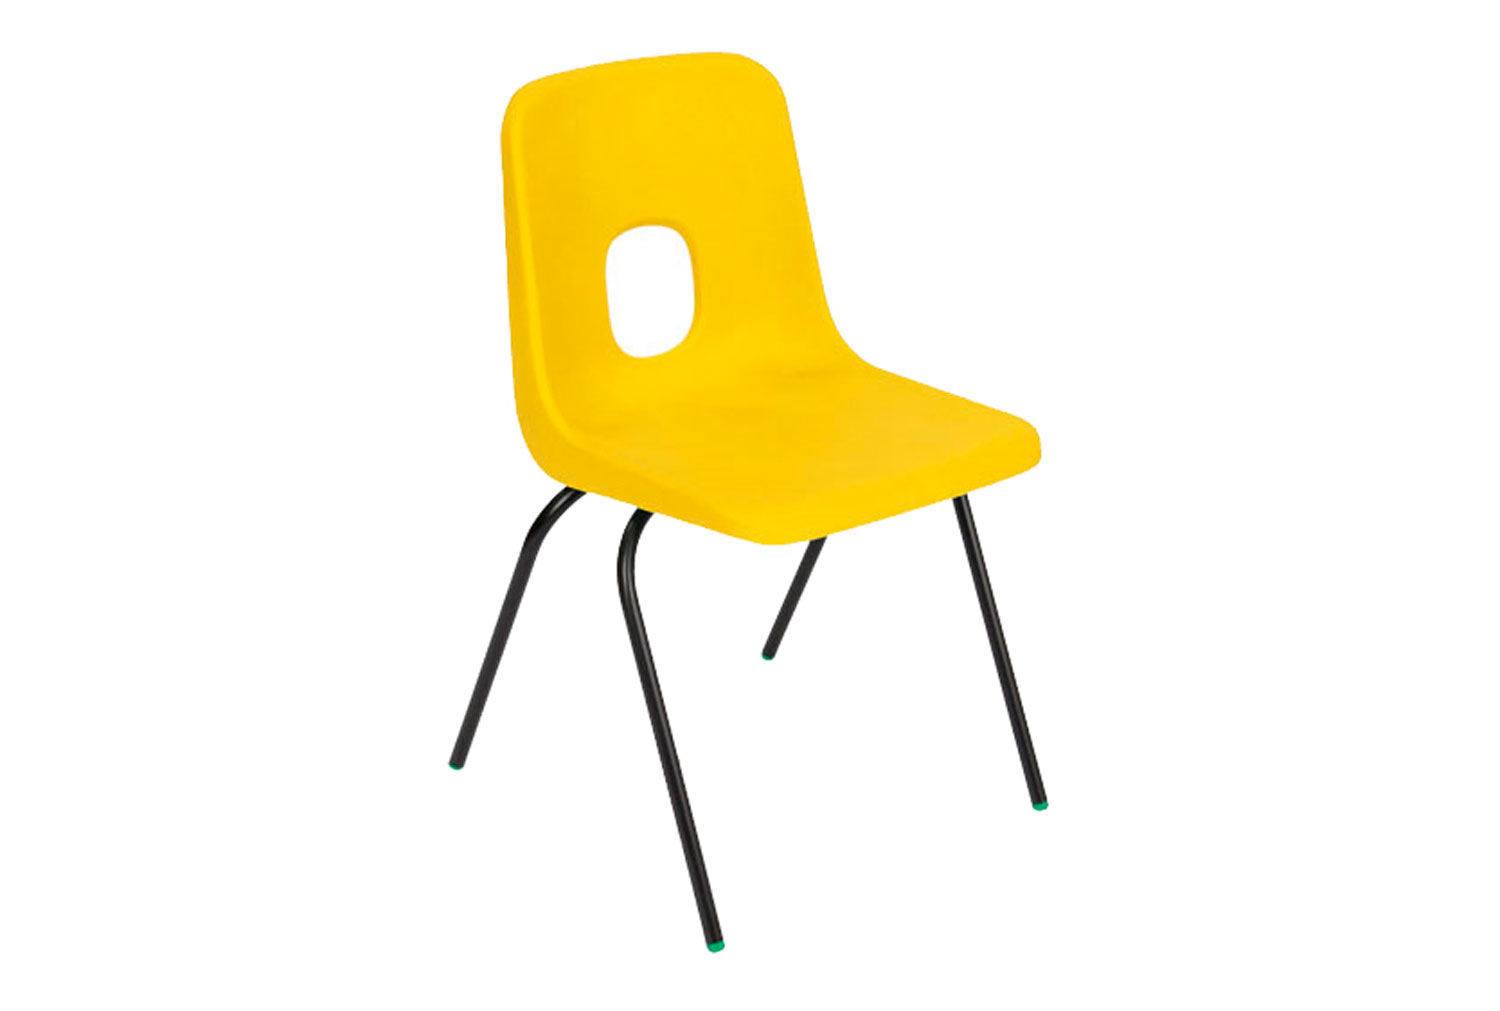 Qty 8 - Hille E Series Classroom Chair, 3-4 Years - 30wx25dx26h (cm), Black Frame, Yellow